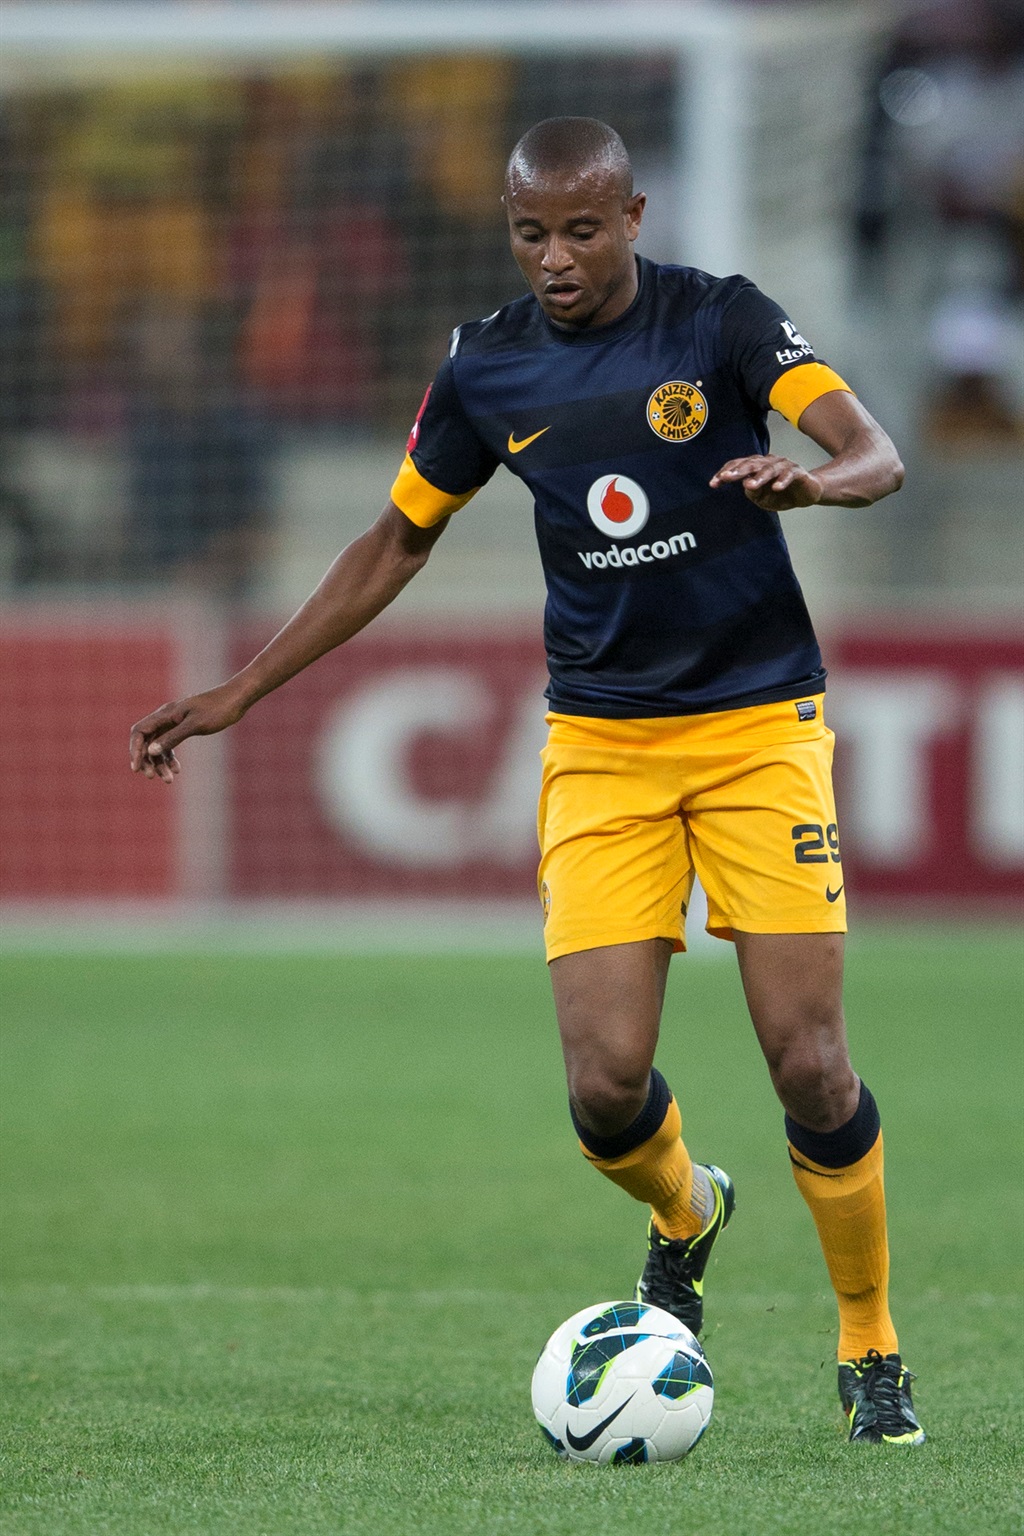 NELSPRUIT, SOUTH AFRICA - SEPTEMBER 24, Jimmy Jambo during the Absa Premiership match between Bidvest Wits and Kaizer Chiefs from Mbombela Stadium on September 24, 2012 in Nelspruit, South Africa